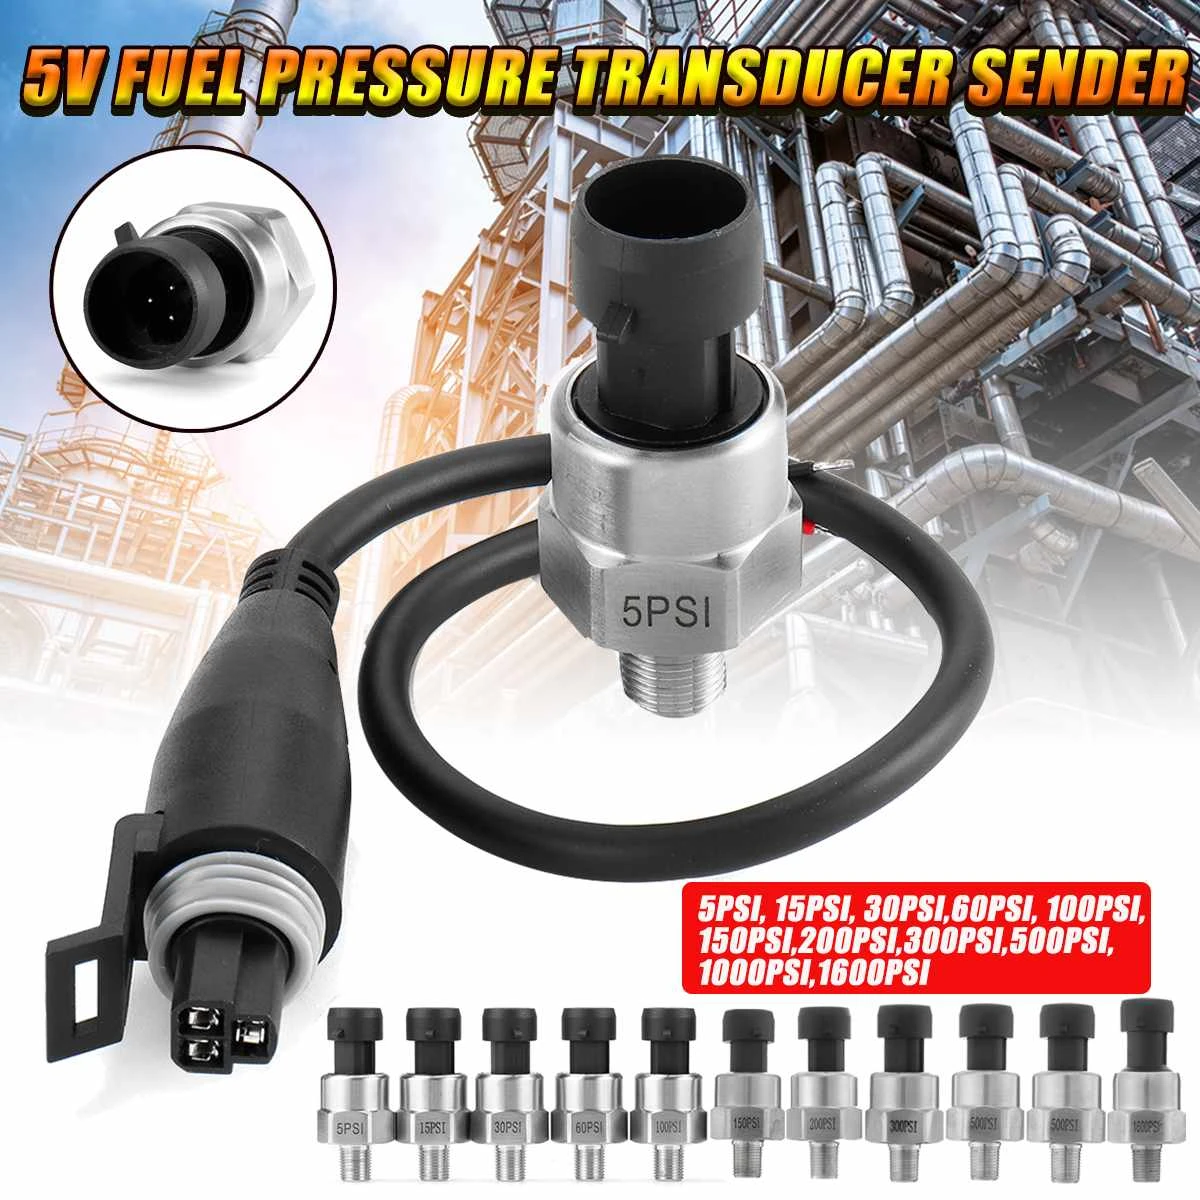 1pc 1/8NPT Thread Stainless Steel Pressure Transducer Sender Sensor for Oil Fuel Air Water Include ​30 psi 100 psi 150 psi 200 psi 300 psi 500 psi 150PSI 